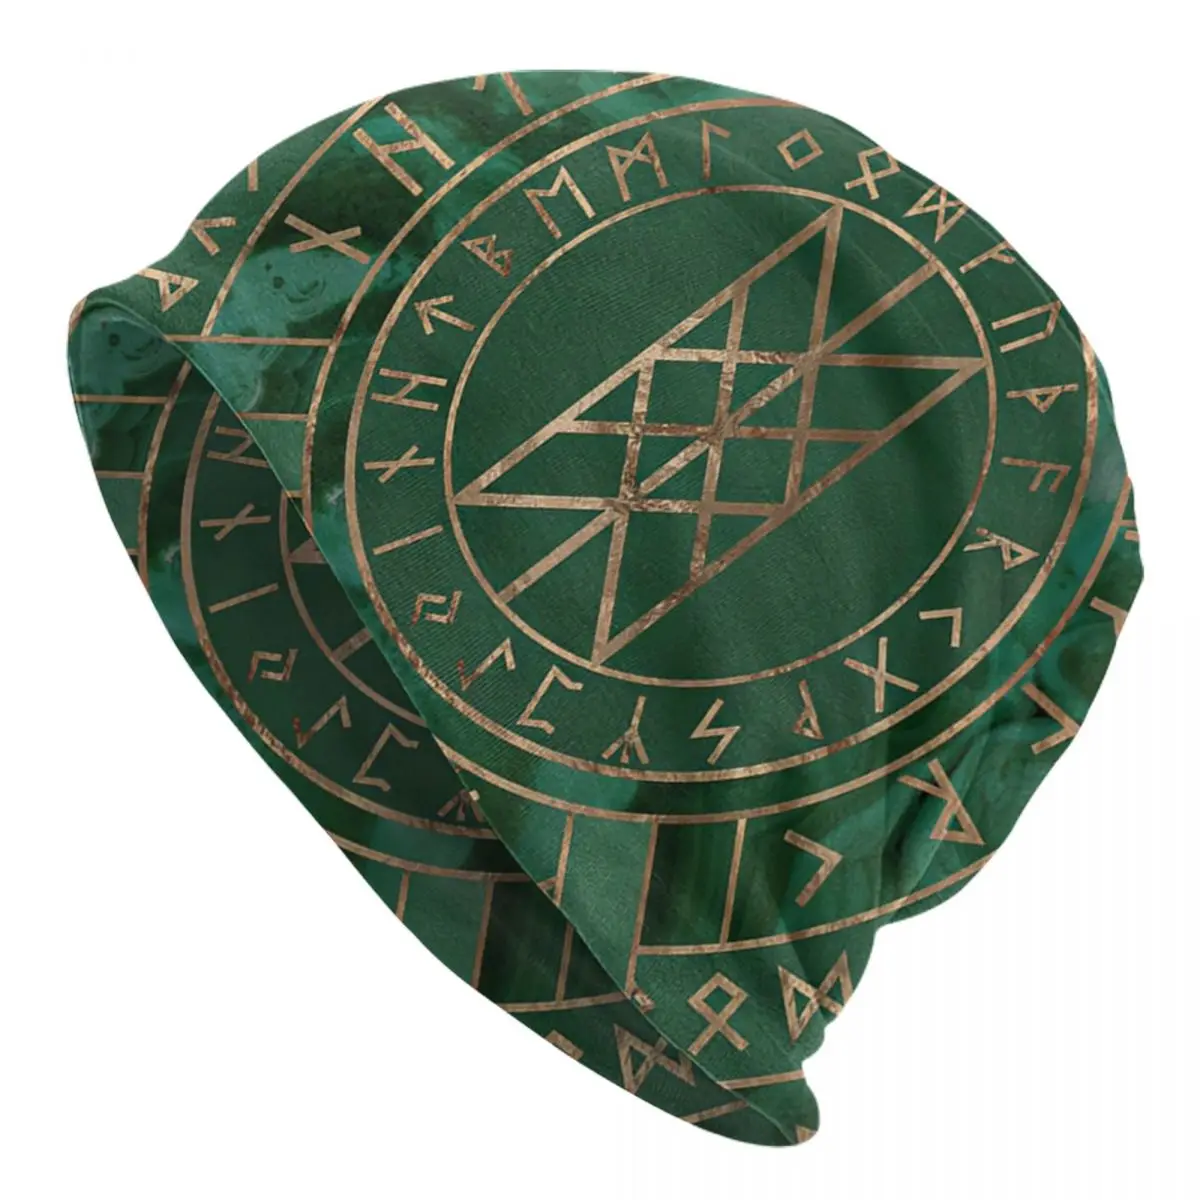 Web Of Wyrd - Malachite, Leather And Golden Texture Adult Men's Women's Knit Hat Keep warm winter knitted hat